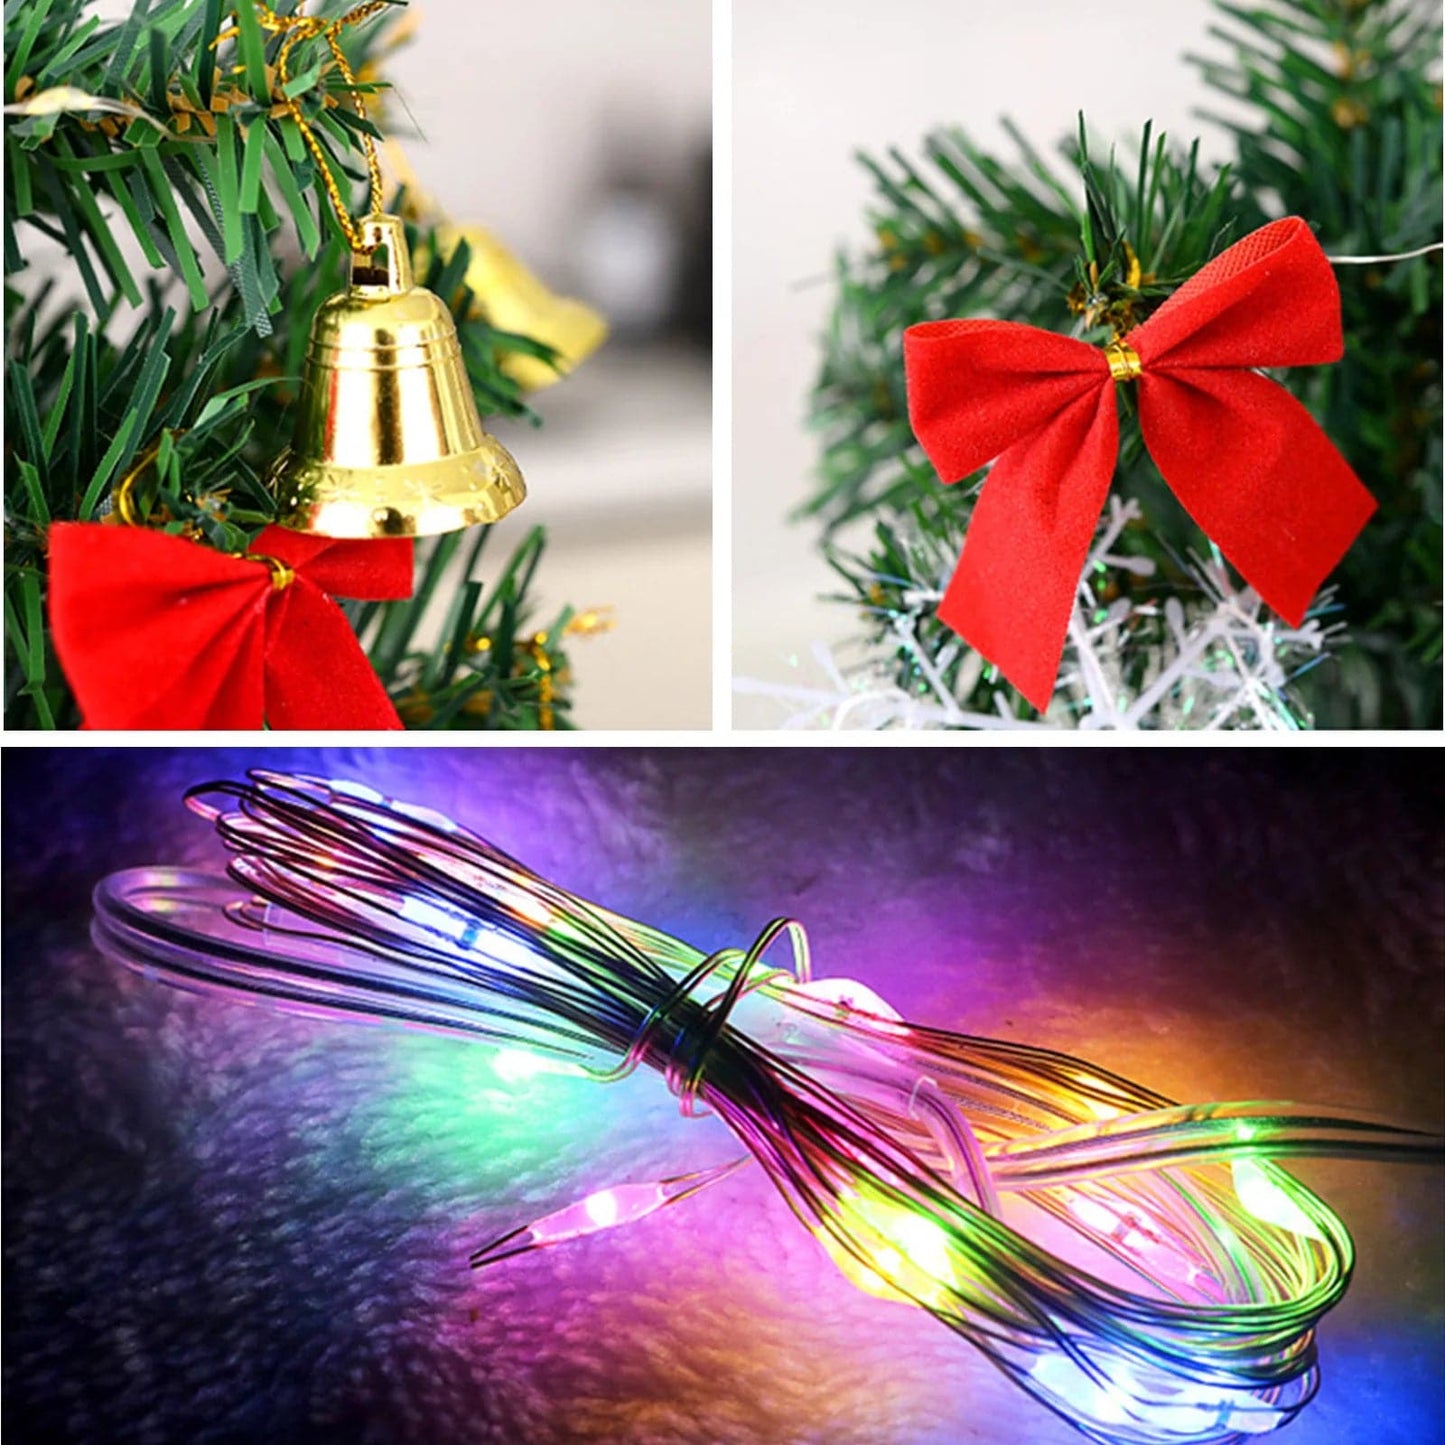 Artificial Mini Christmas Tree with Colorful LED String Lights, Tabletop Christmas Tree with Christmas small bell Ornaments